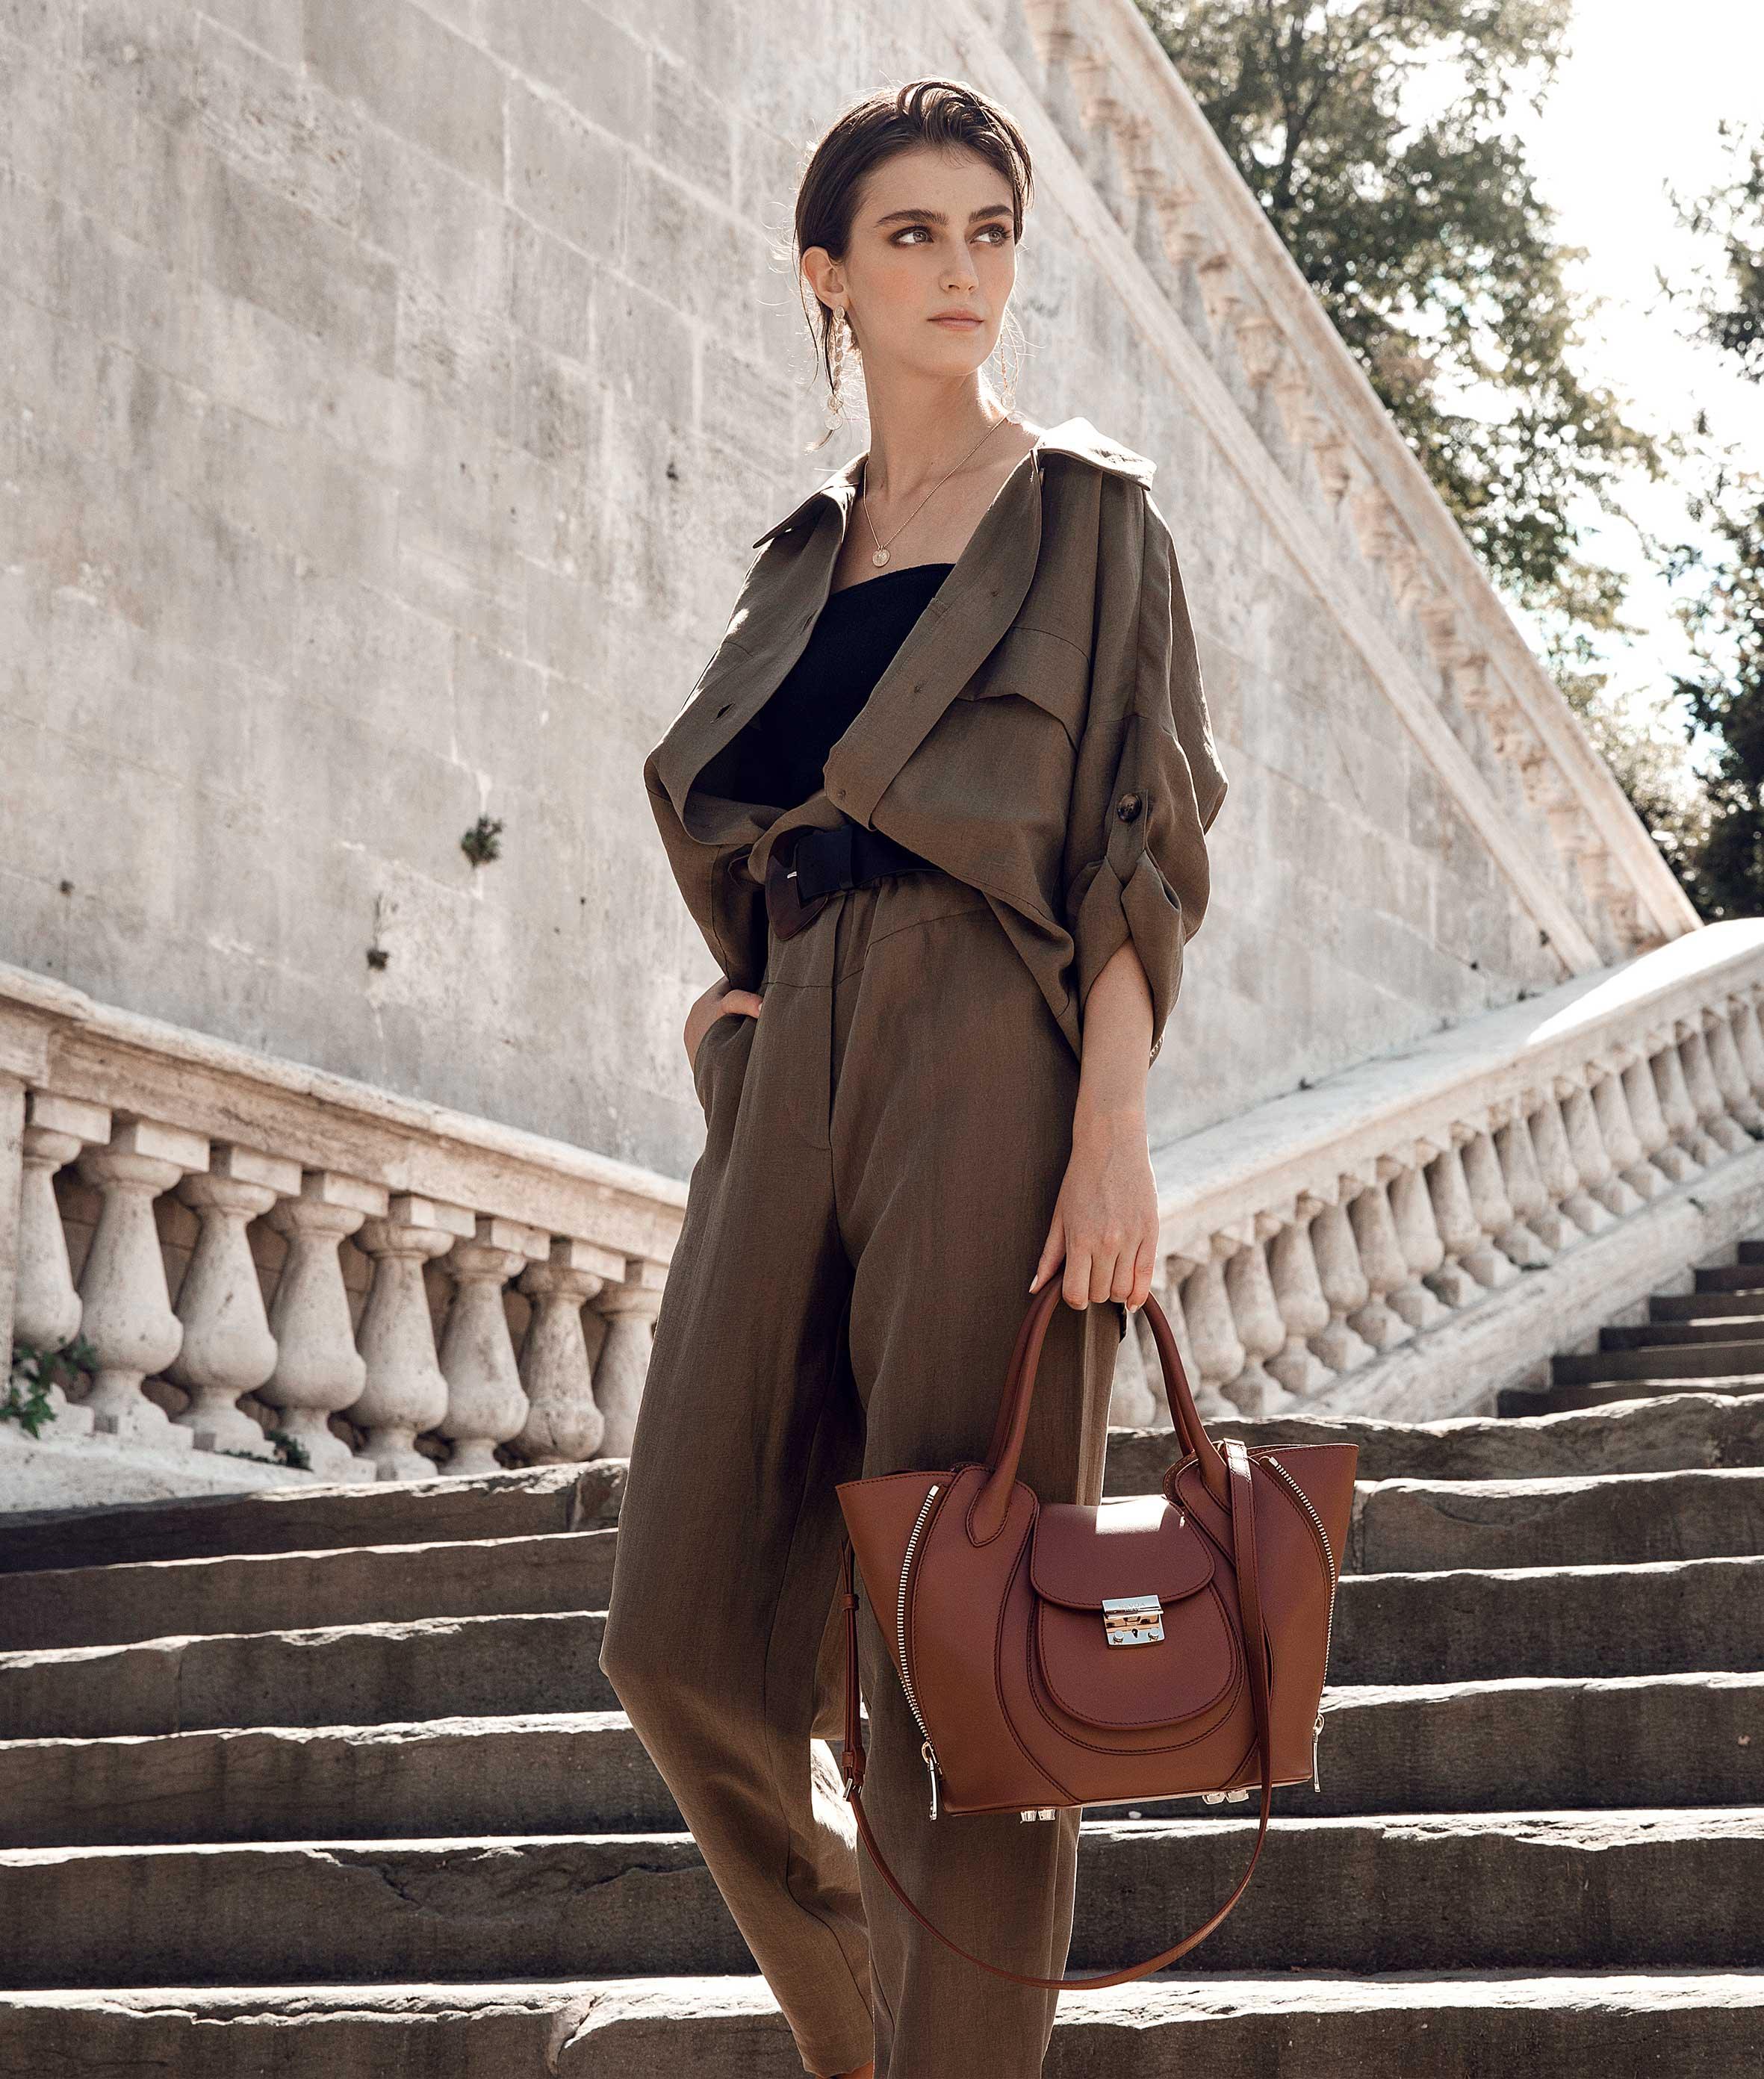 Tan Luxury Designer Bag - Marrying London's fashion with Italian craftsmanship, crafted from deforestation-free leather.